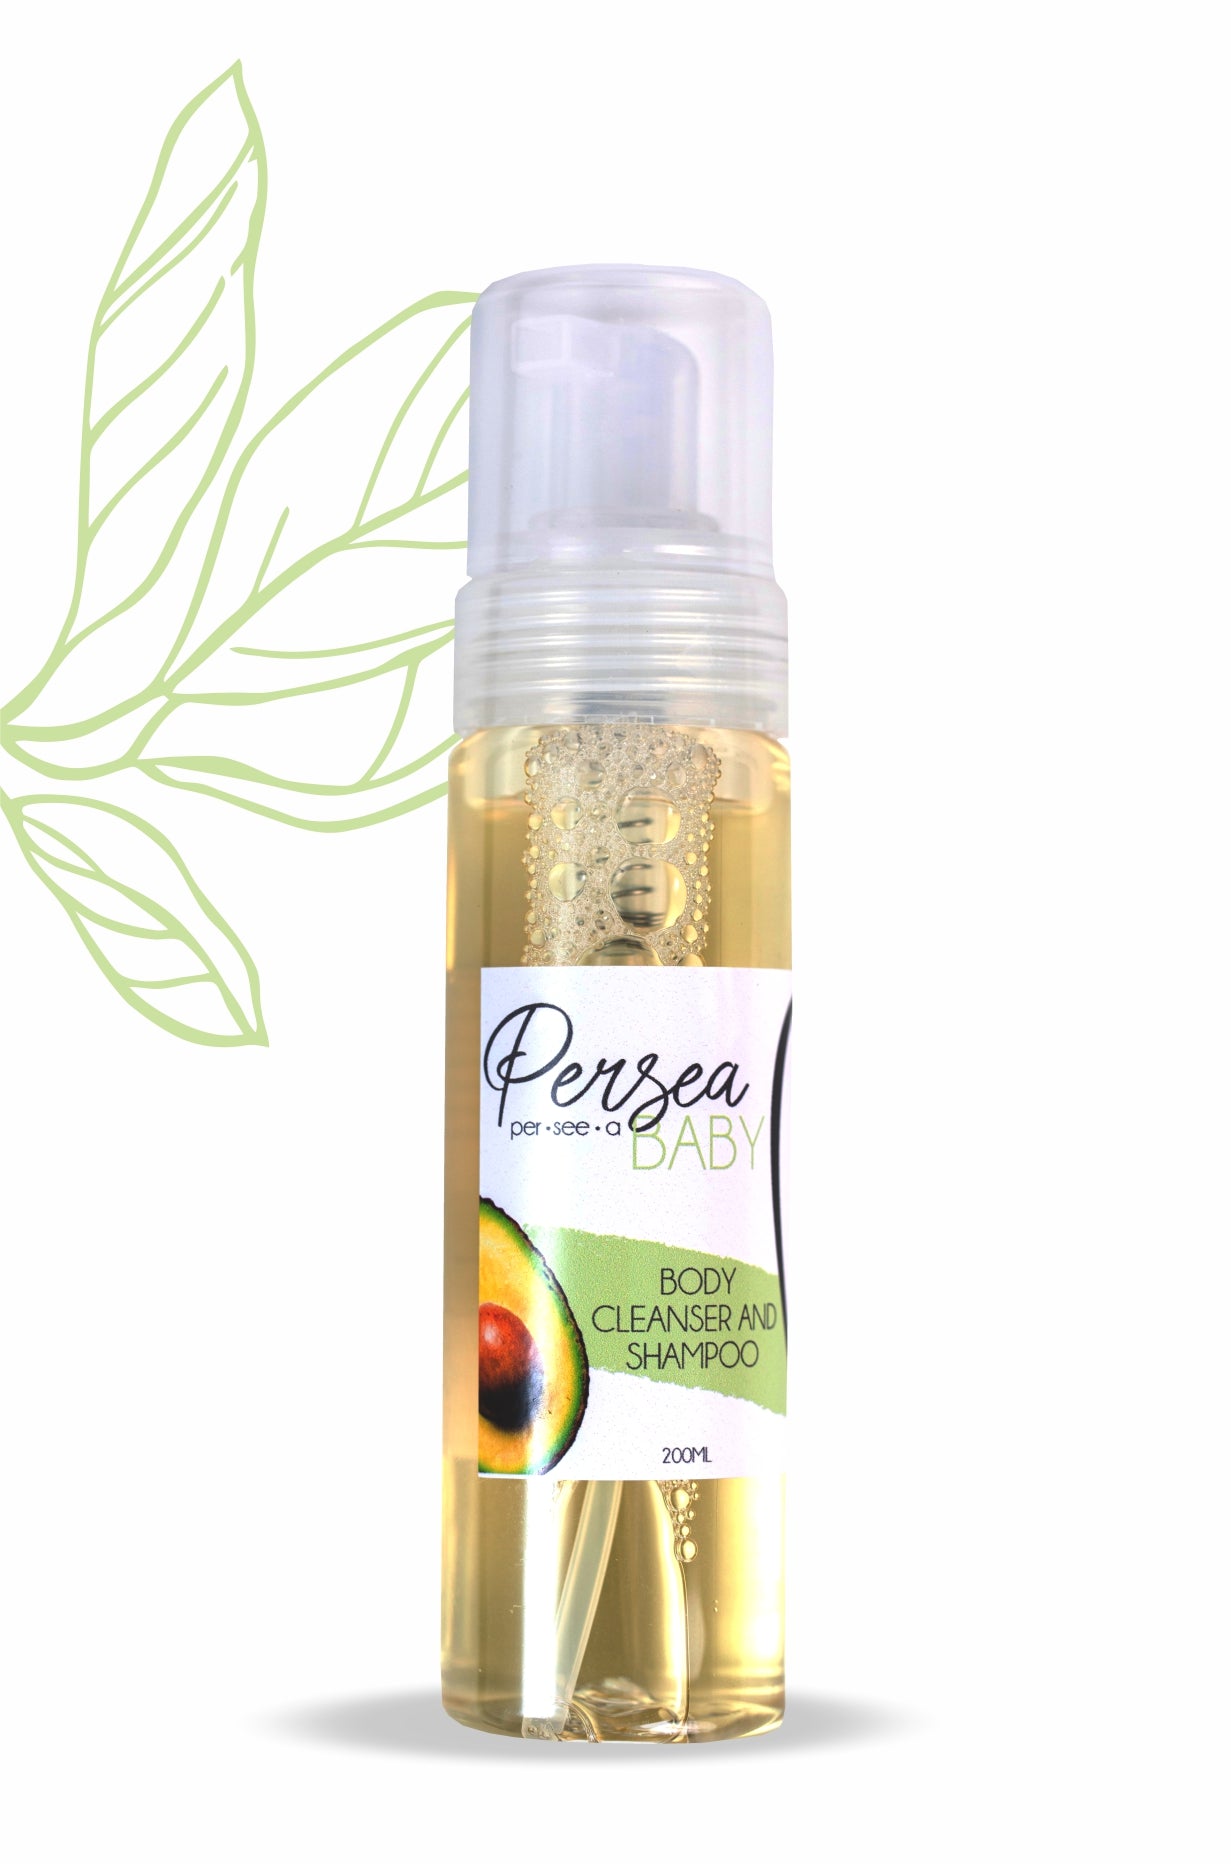 Persea Baby Body Cleanser and Shampoo. All Natural.